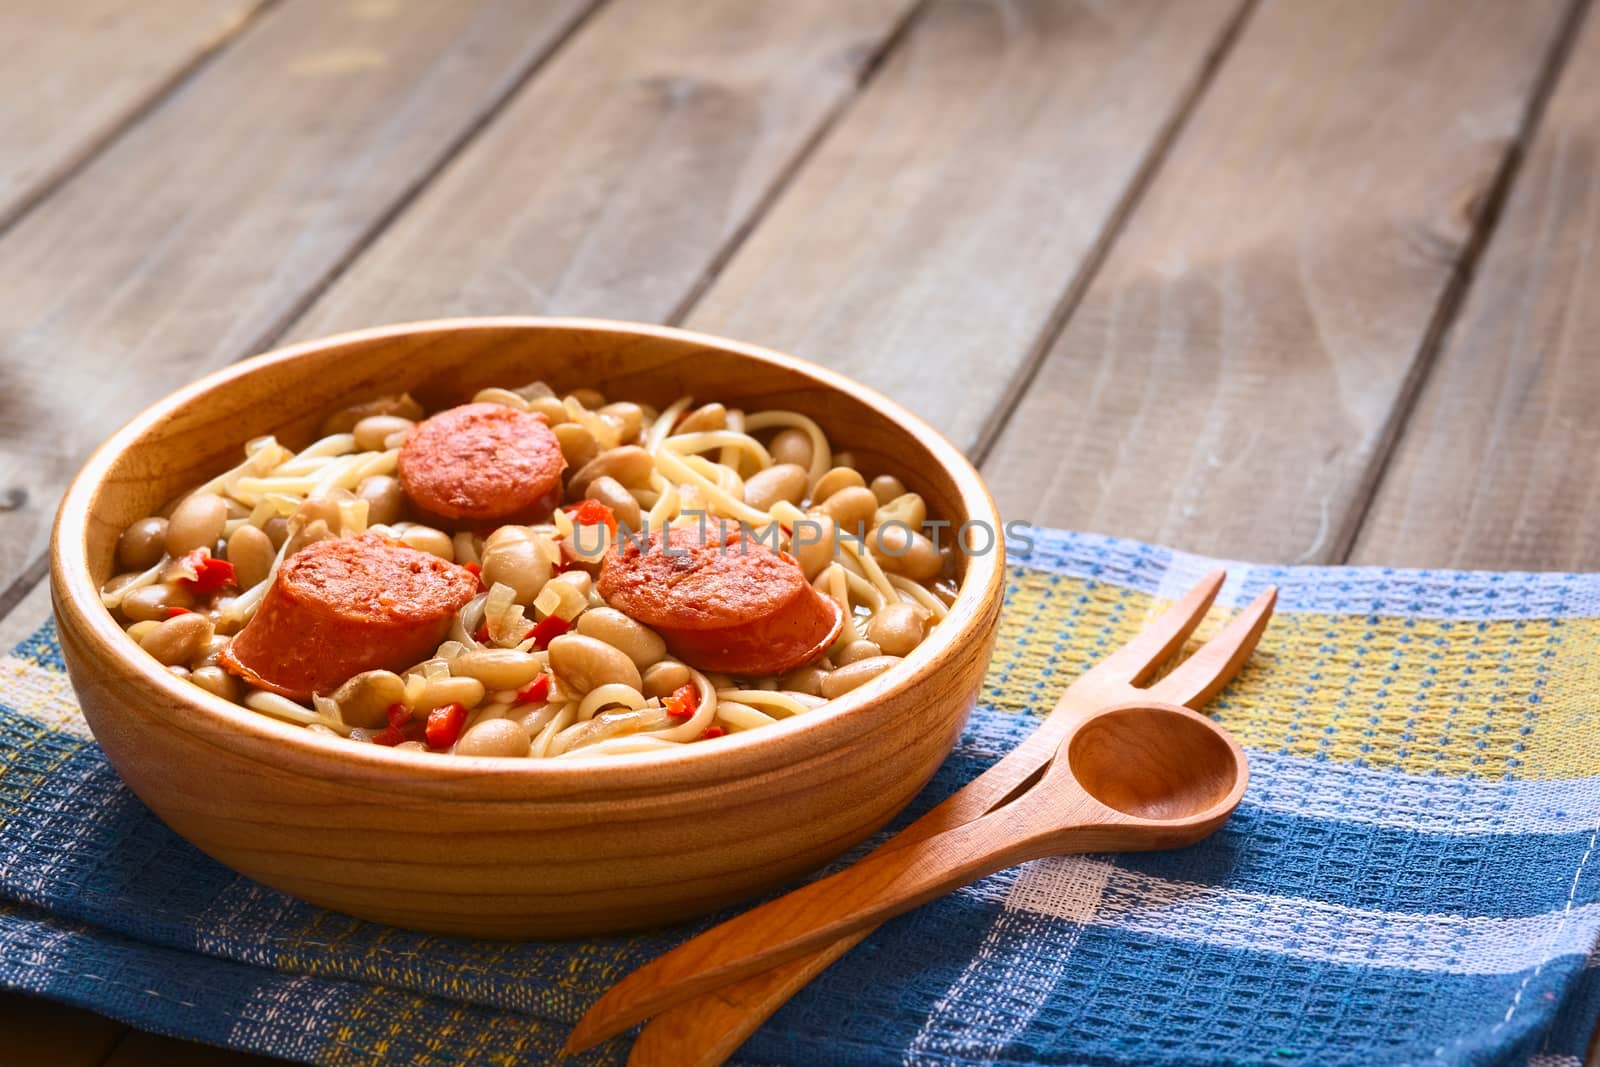 Traditional Chilean dish called Porotos con Riendas (English: beans with reins), made of cooked beans, linguine (flat spaghetti) and served with fried sausage, photographed on dark wood with natural light (Selective Focus, Focus one third into the dish)